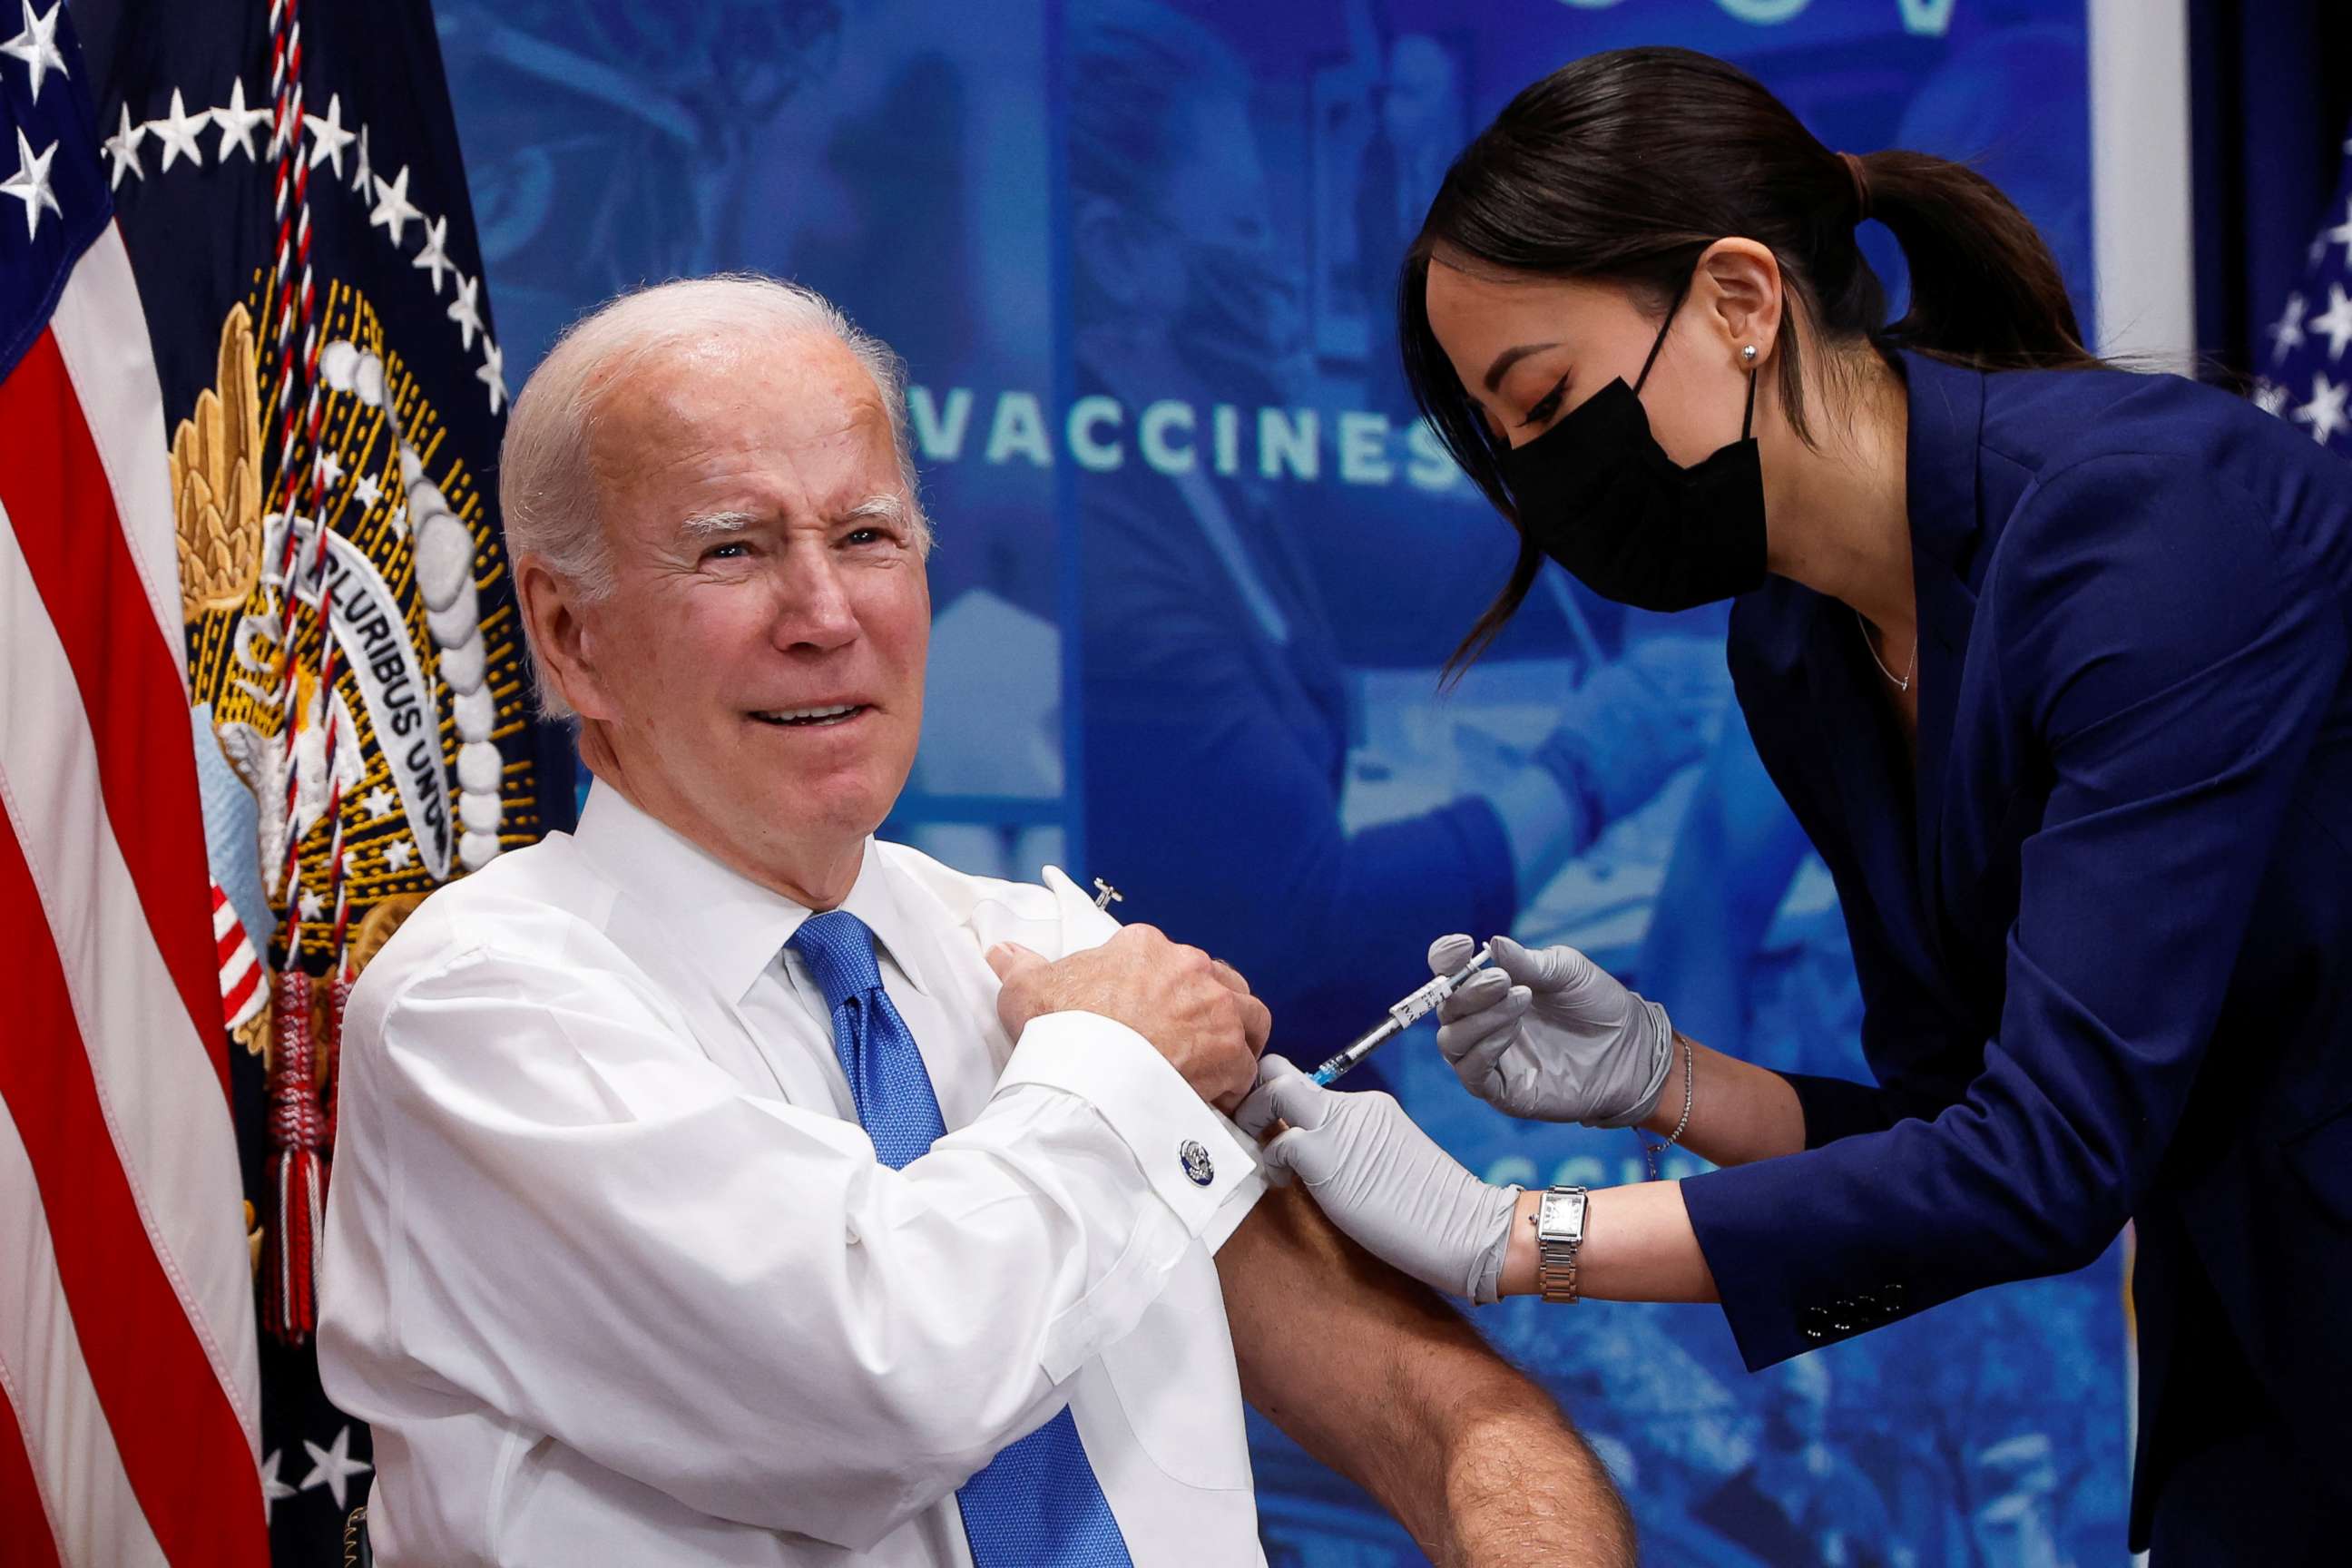 PHOTO: President Joe Biden receives an updated coronavirus disease (COVID-19) vaccine while launching a new plan for Americans to receive booster shots and vaccinations, onstage in an auditorium on the White House campus in Washington, October 25, 2022.